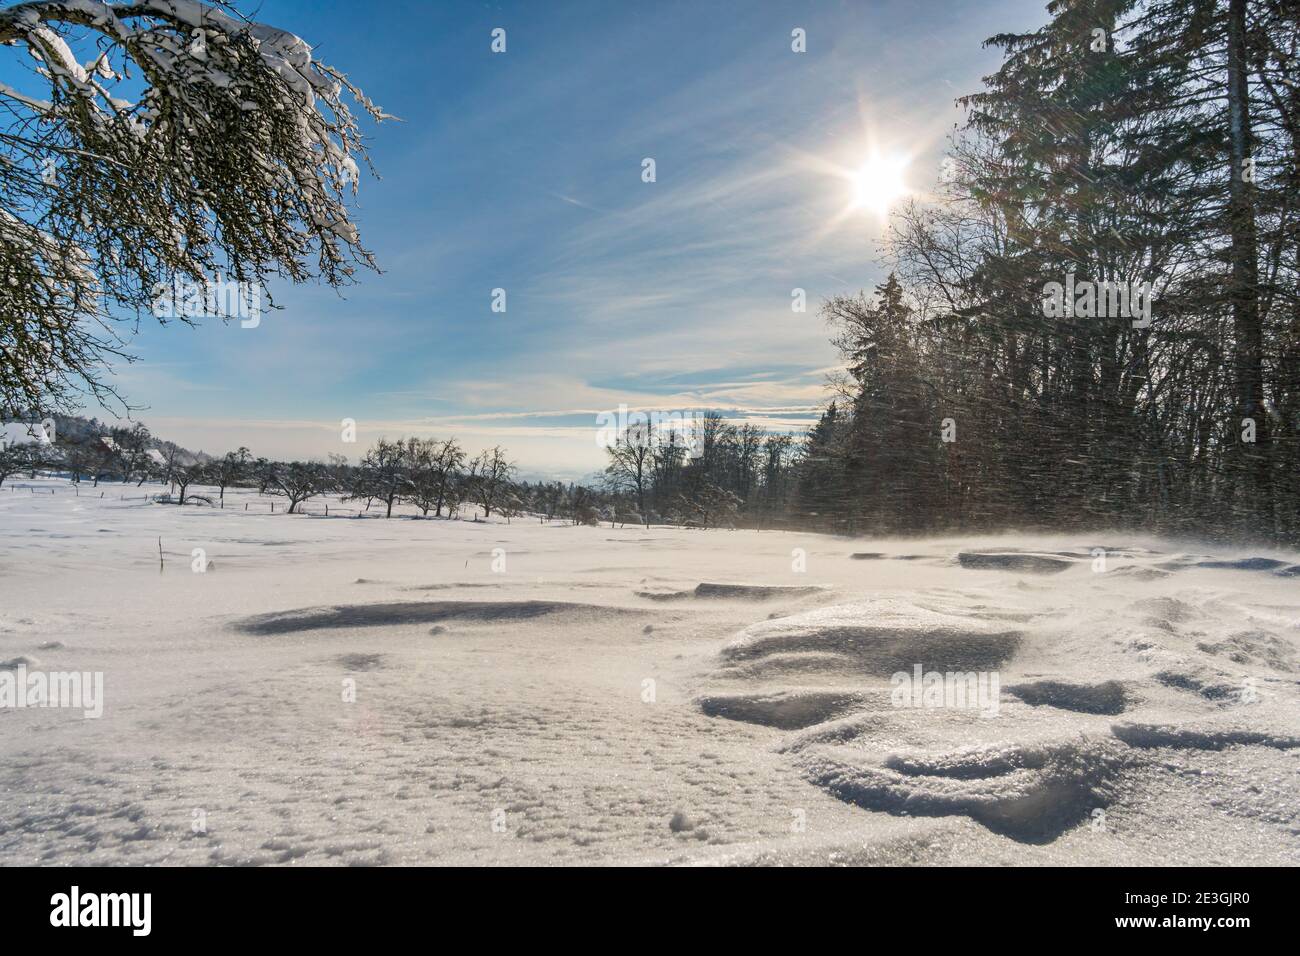 Fantastic snowshoe tour in the winter wonderland at the Gehrenberg near Lake Constance Stock Photo